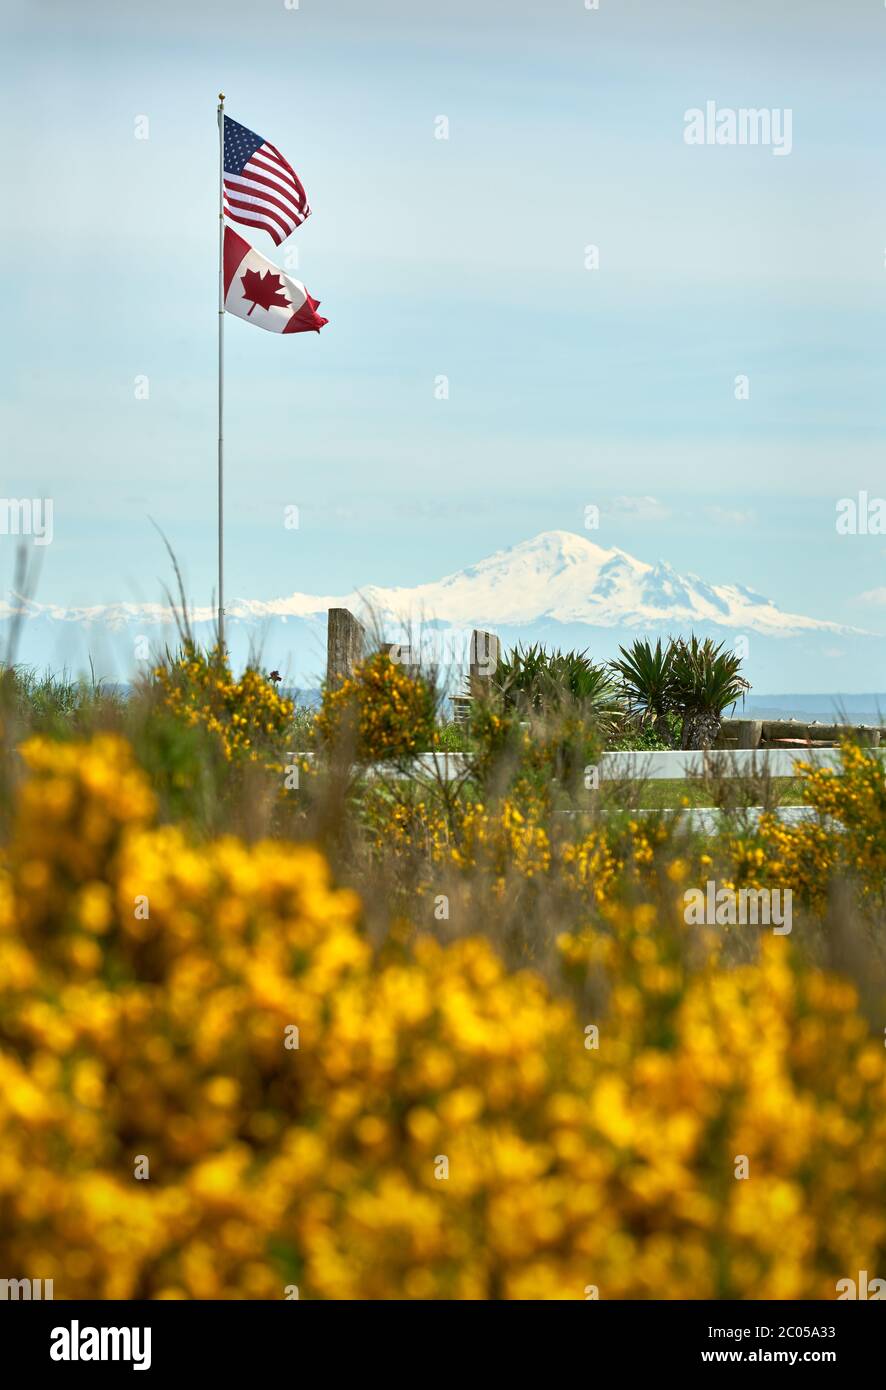 Stars and Stripes and Maple Leaf Flags. An American and Canadian Flag fly together in Point Roberts, Washington State with a view of Mount Baker. Stock Photo